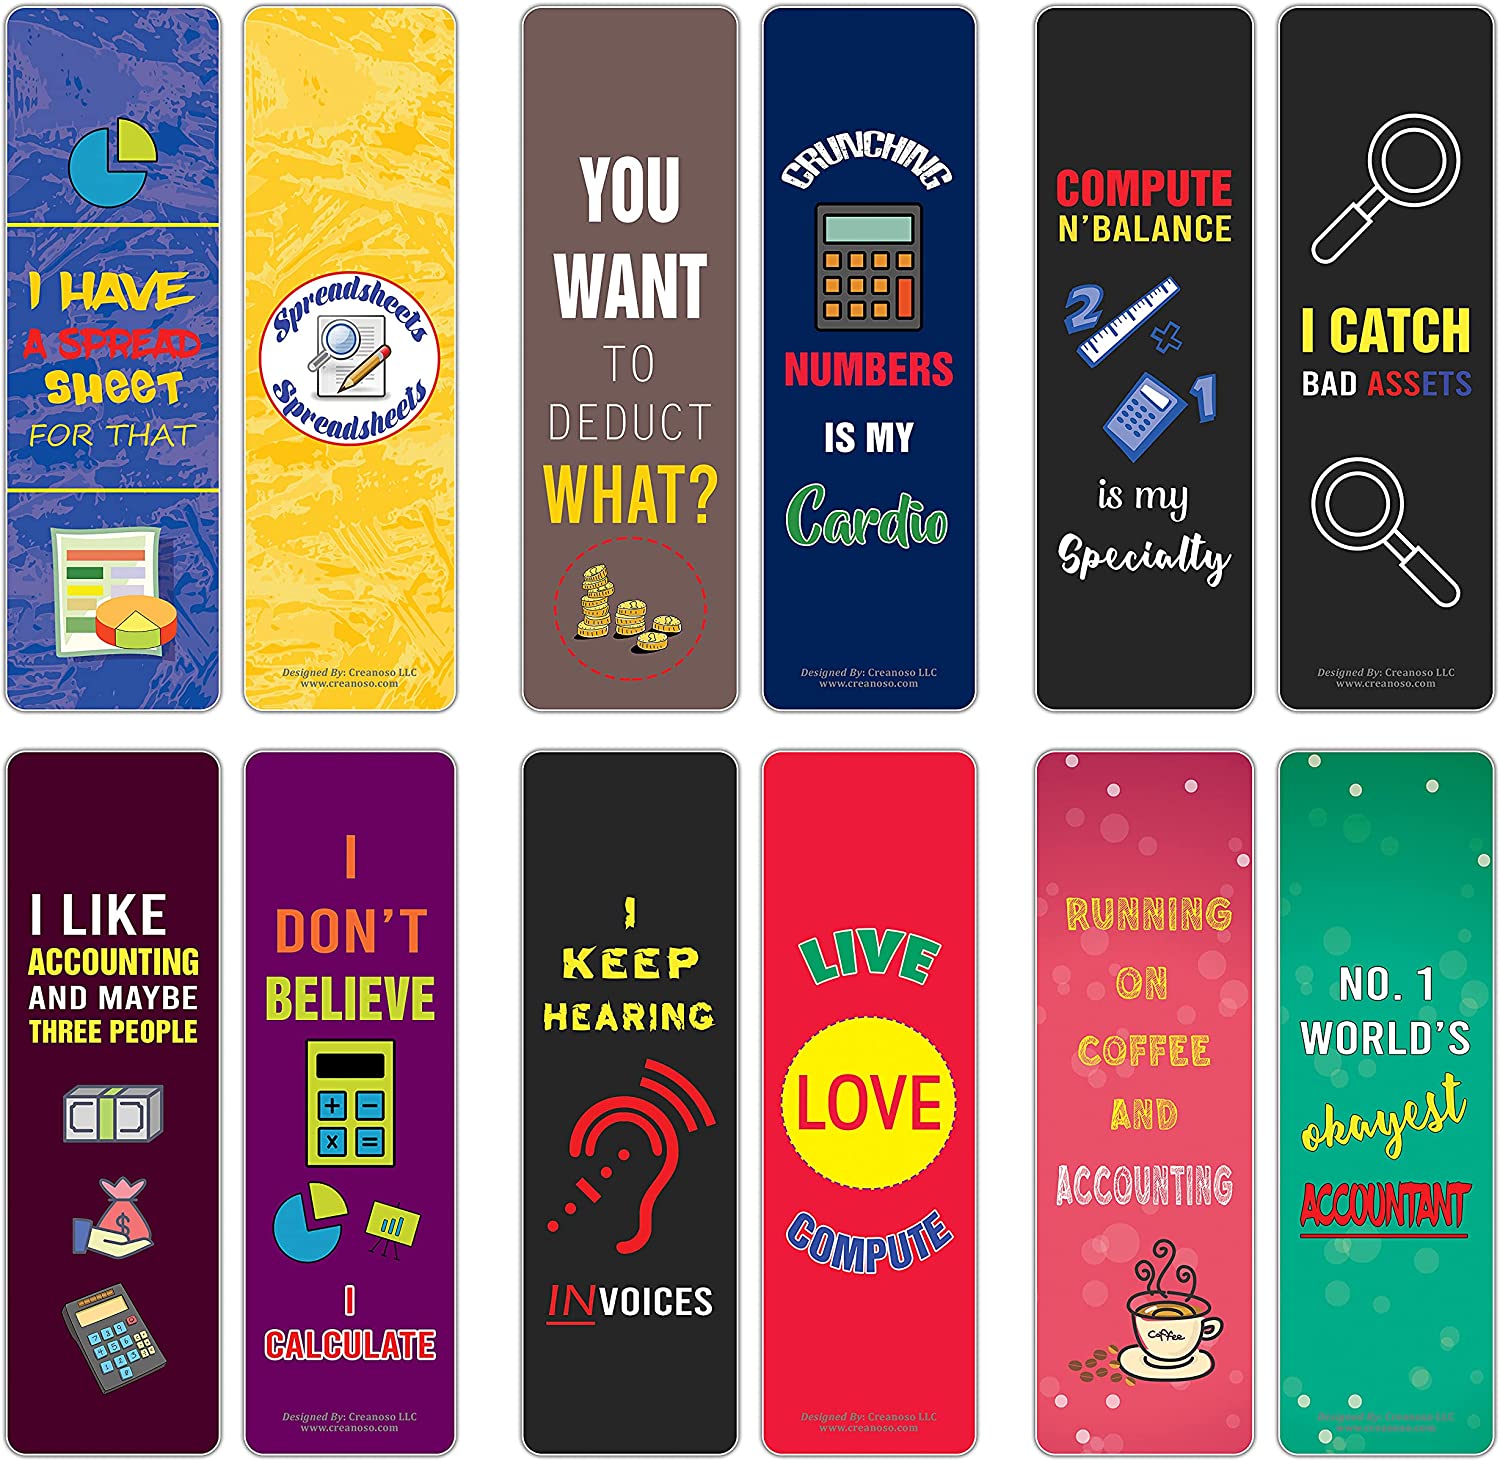 I am an Accountant Bookmarks (2-Sets X 6 Cards)